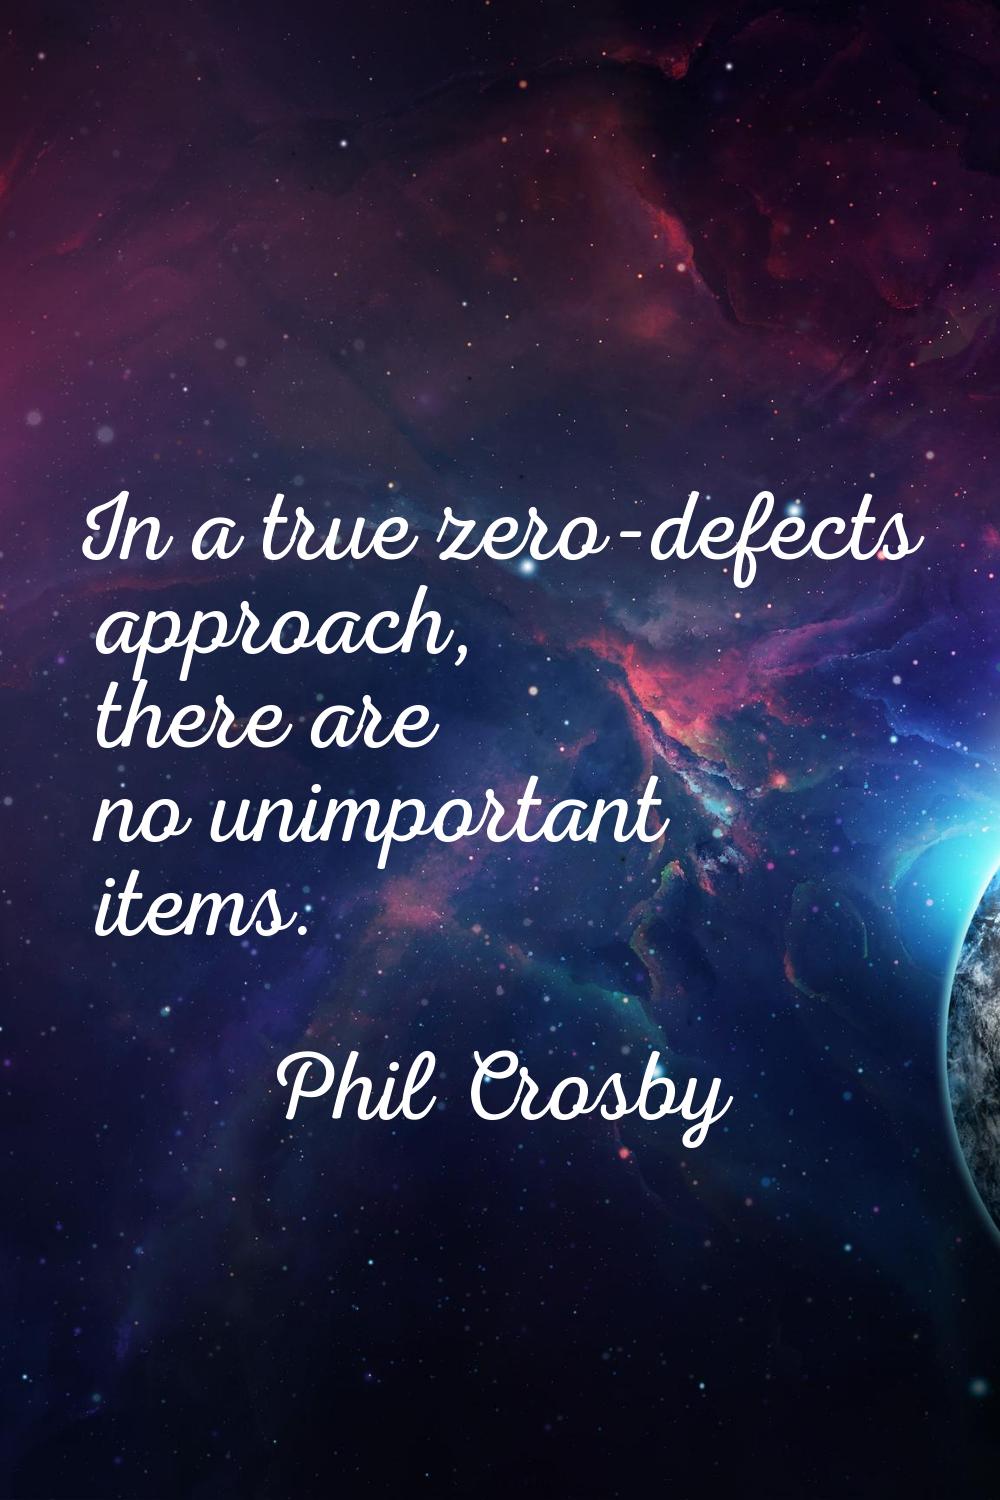 In a true zero-defects approach, there are no unimportant items.